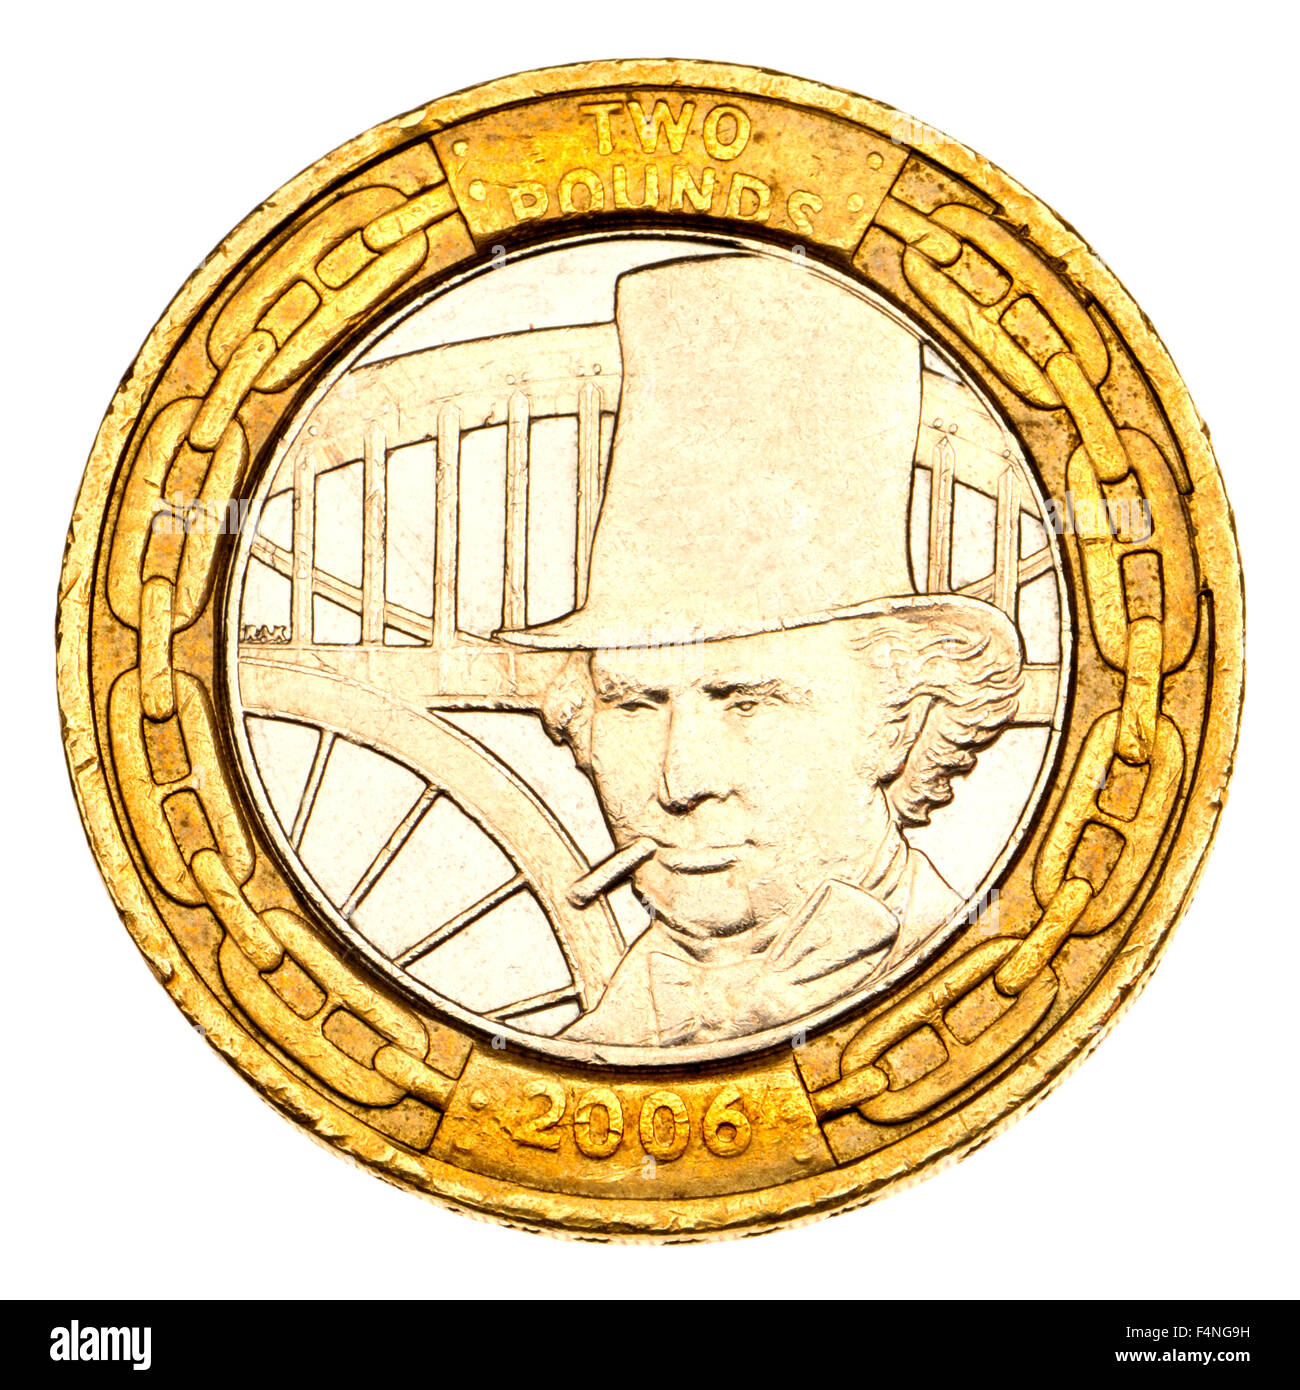 British £2 coin (2006) commemorating 200 years since the birth of ISAMBARD KINGDOM BRUNEL (engineer: 1806-1859) Design A portrai Stock Photo